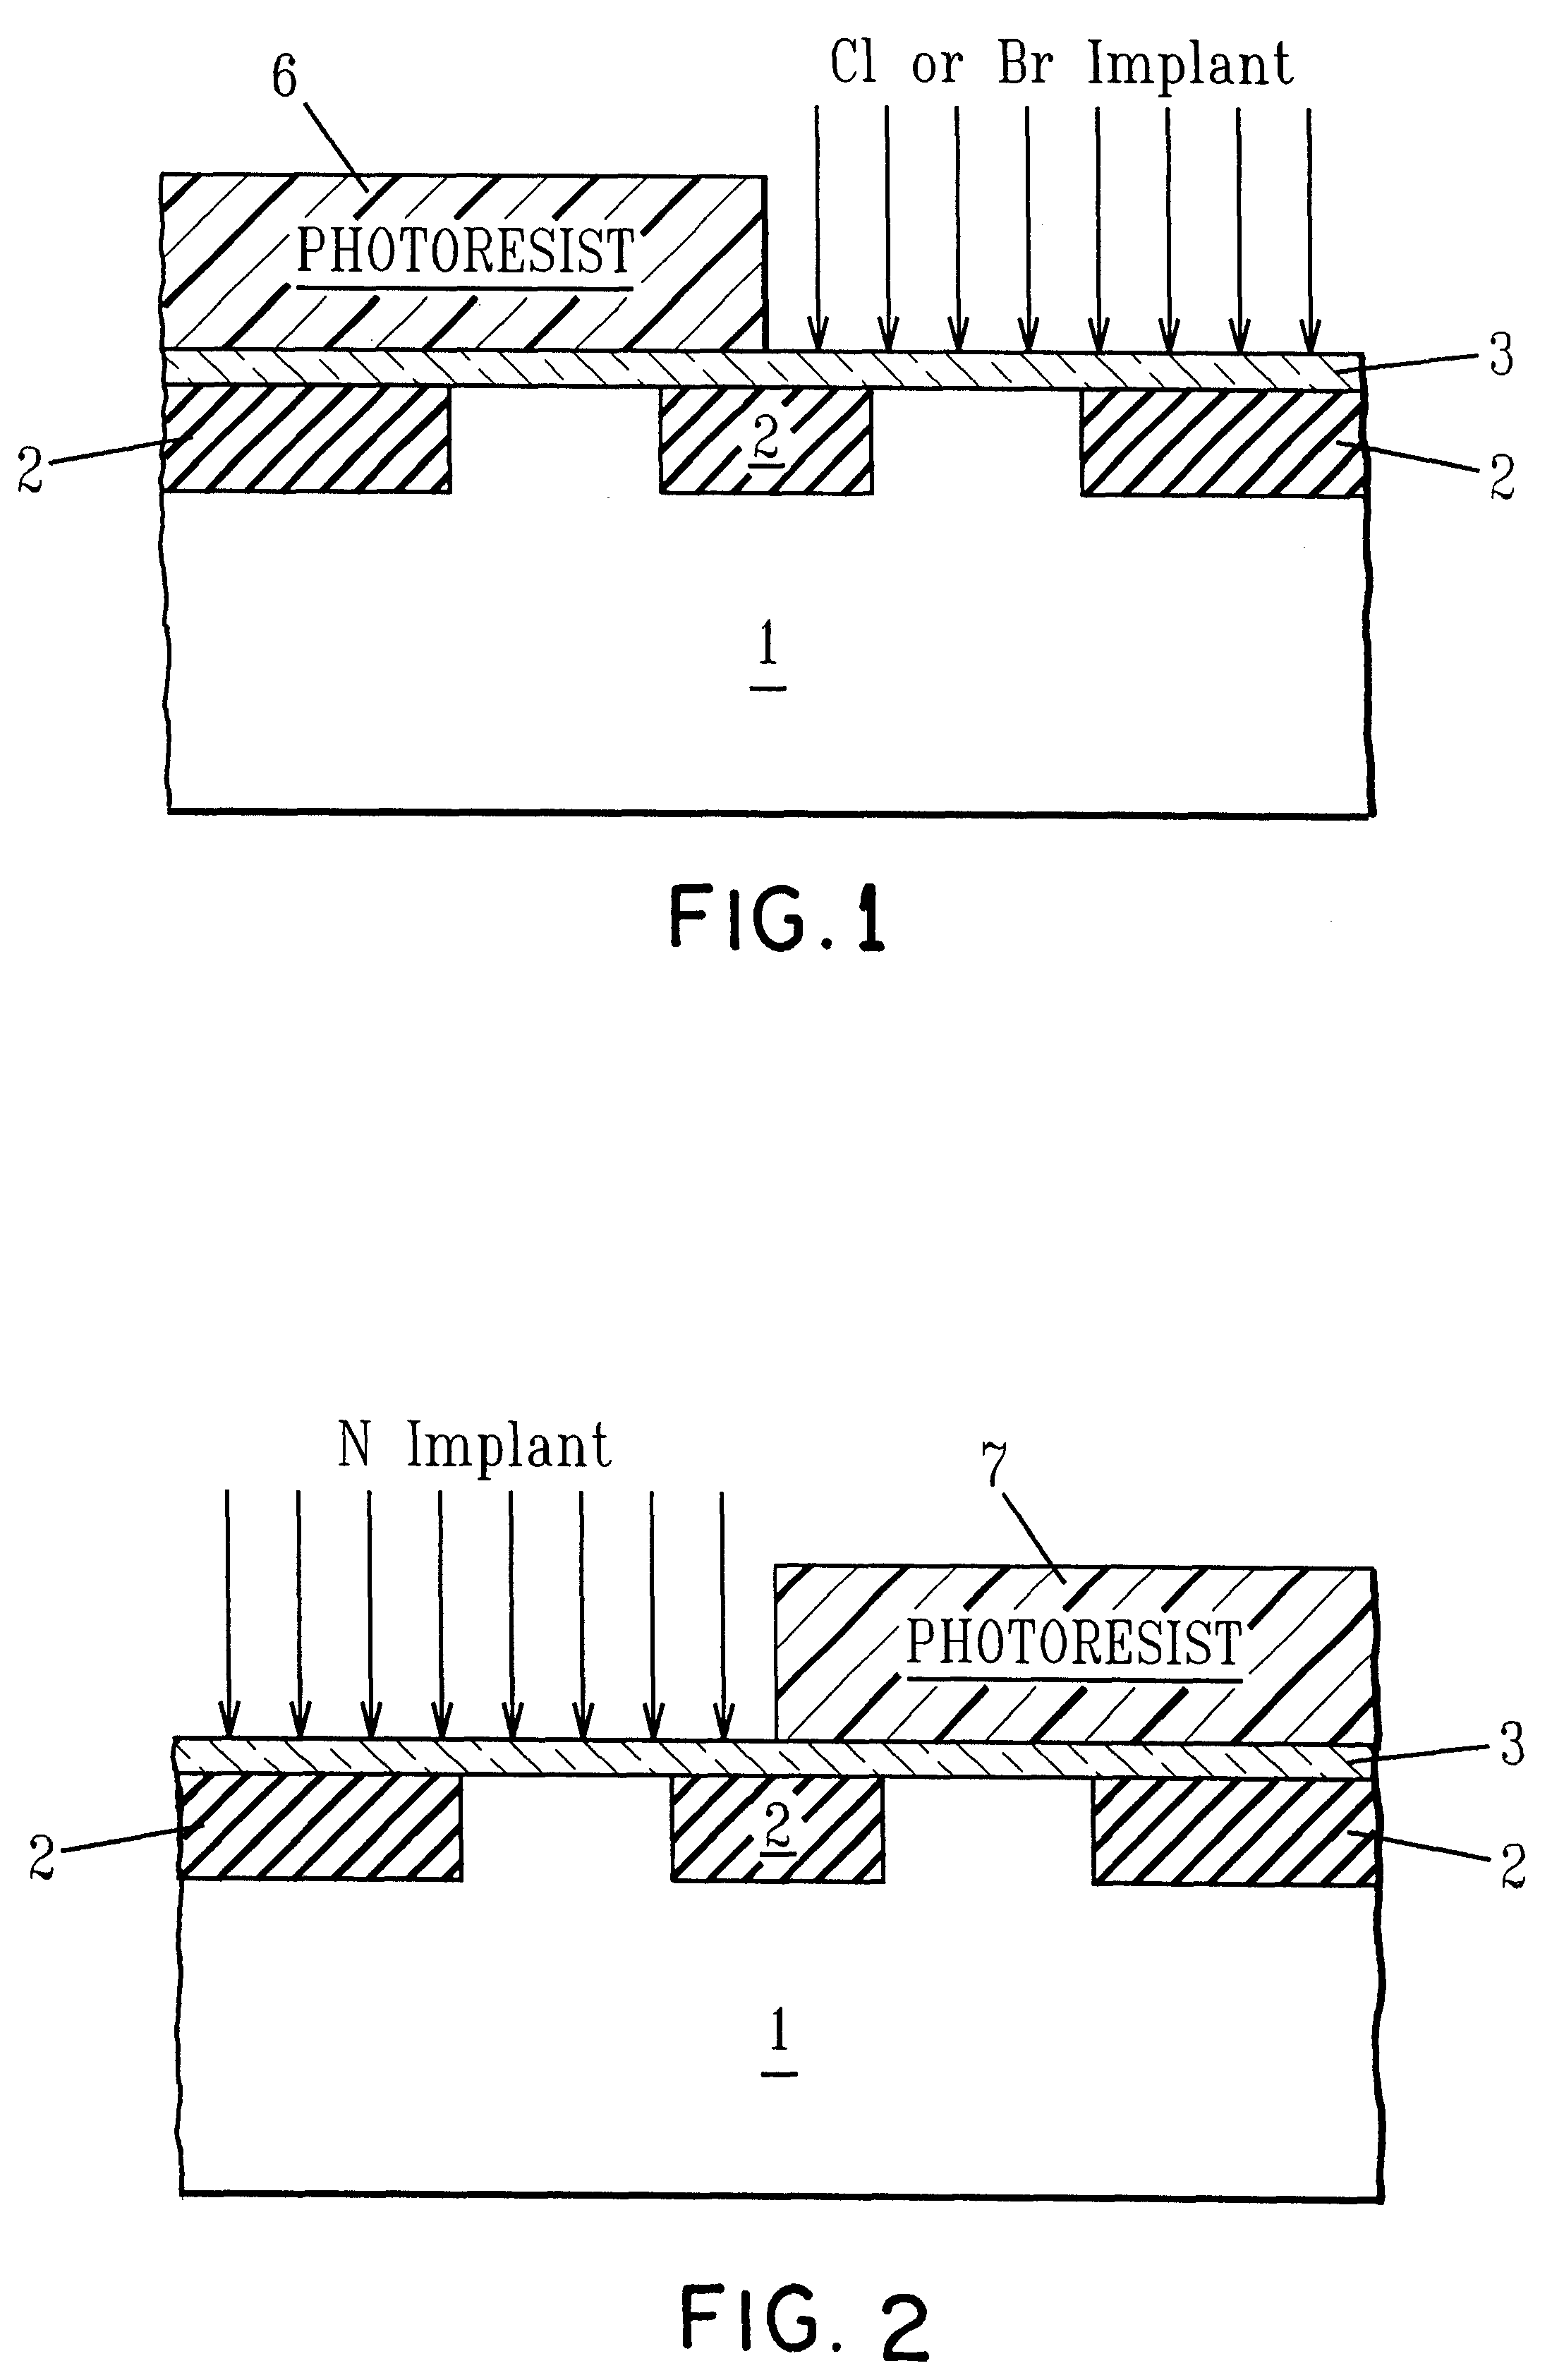 Method for fabricating different gate oxide thicknesses within the same chip